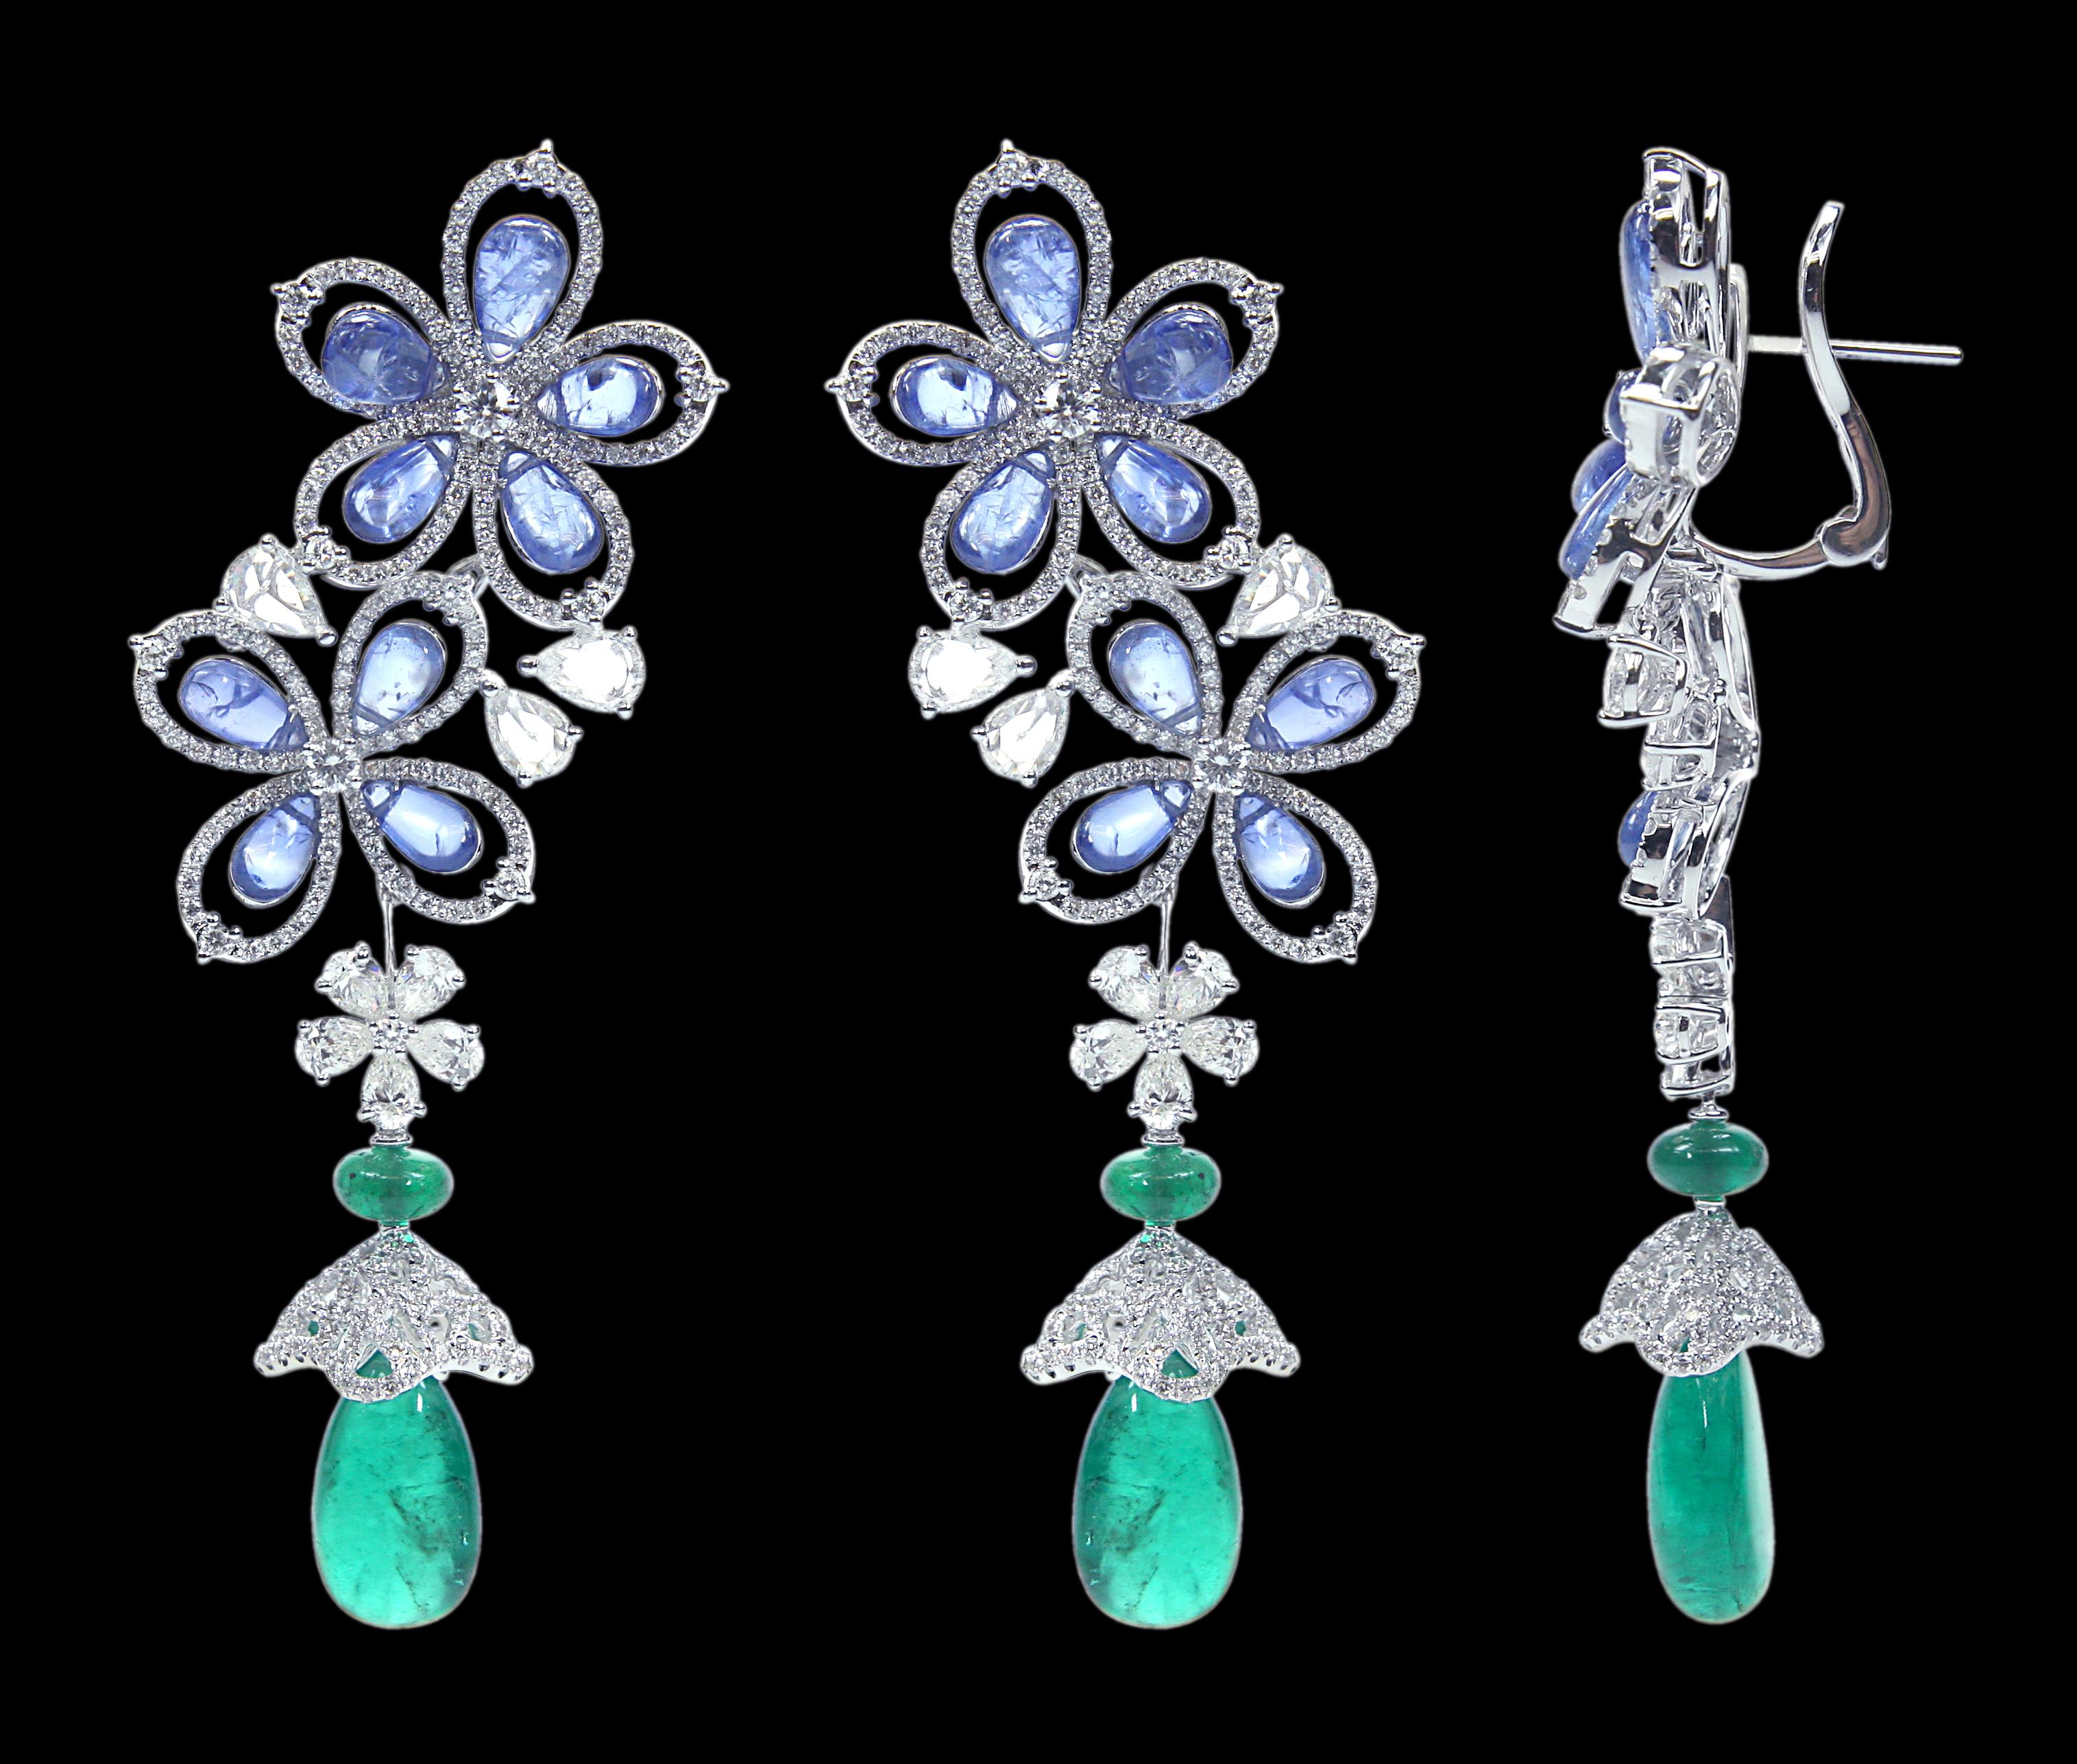 Pear Cut Bedazzling 18 Karat White Gold, Diamond, Sapphire and Emerald Drop Earrings For Sale